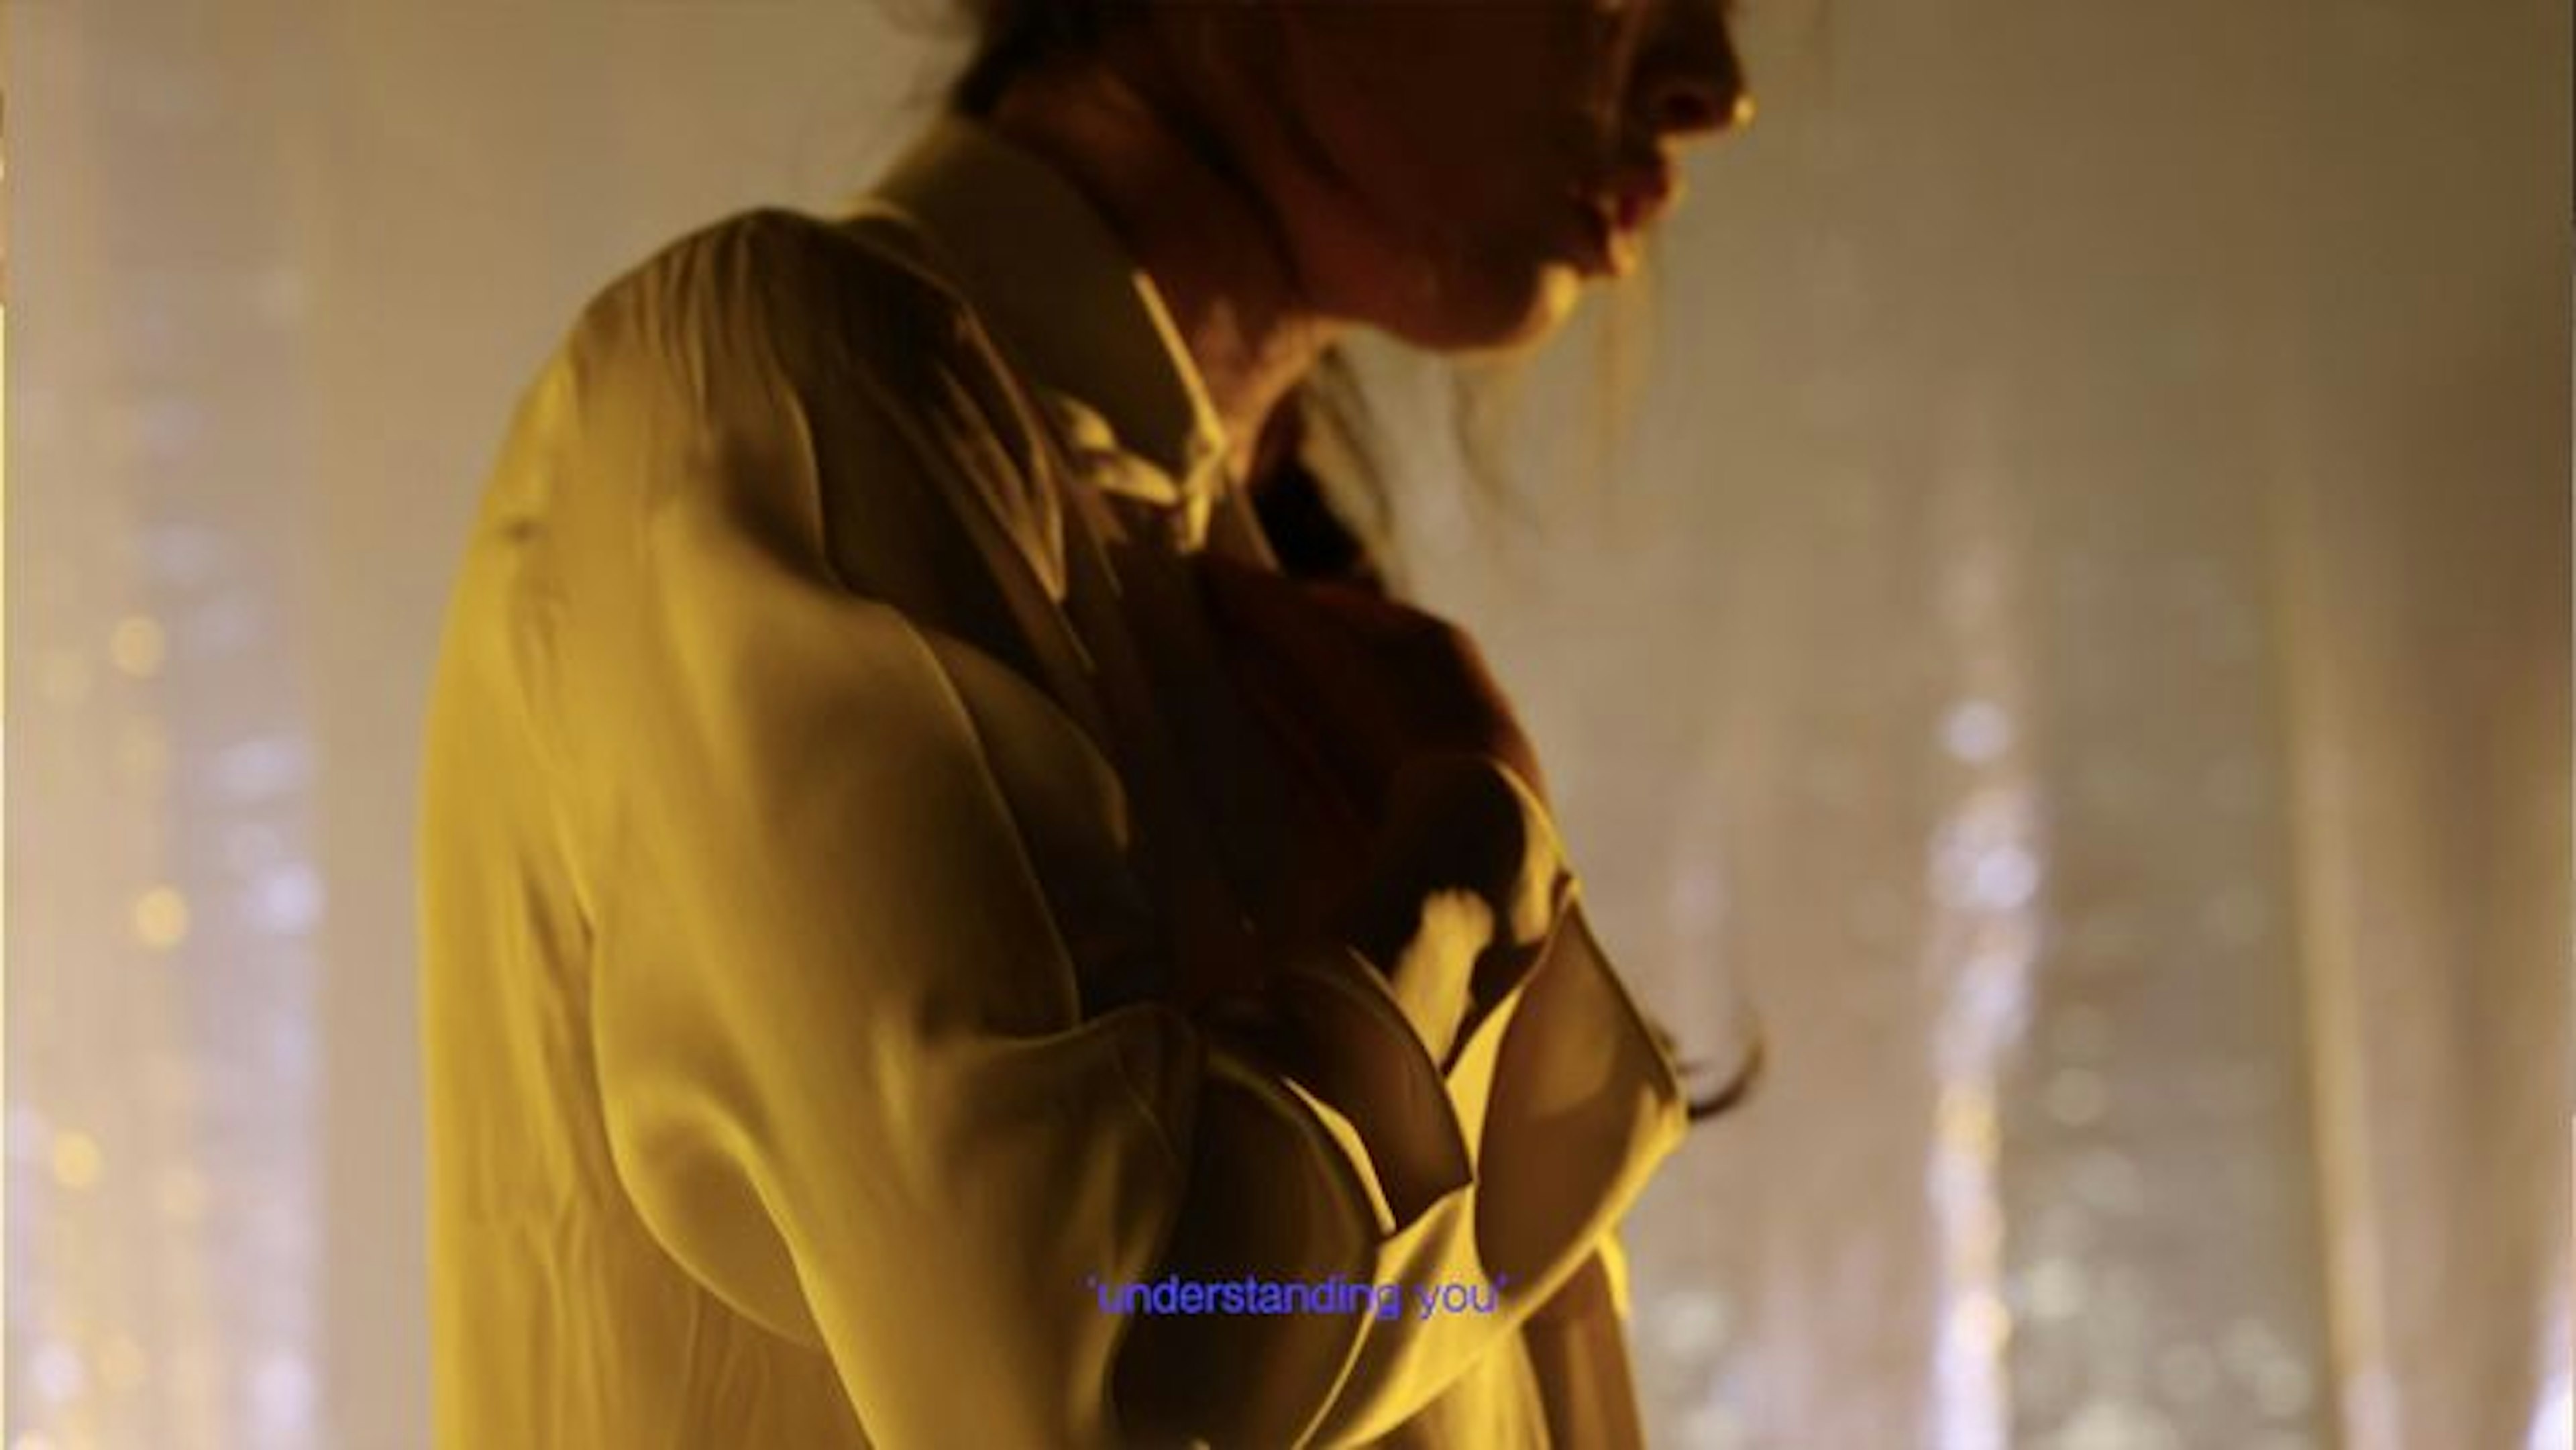 Close-up of a person wearing a yellow chemise, their face slightly out of frame. They have their arms crossed over their chest. There are purple subtitles that read “understanding you.”